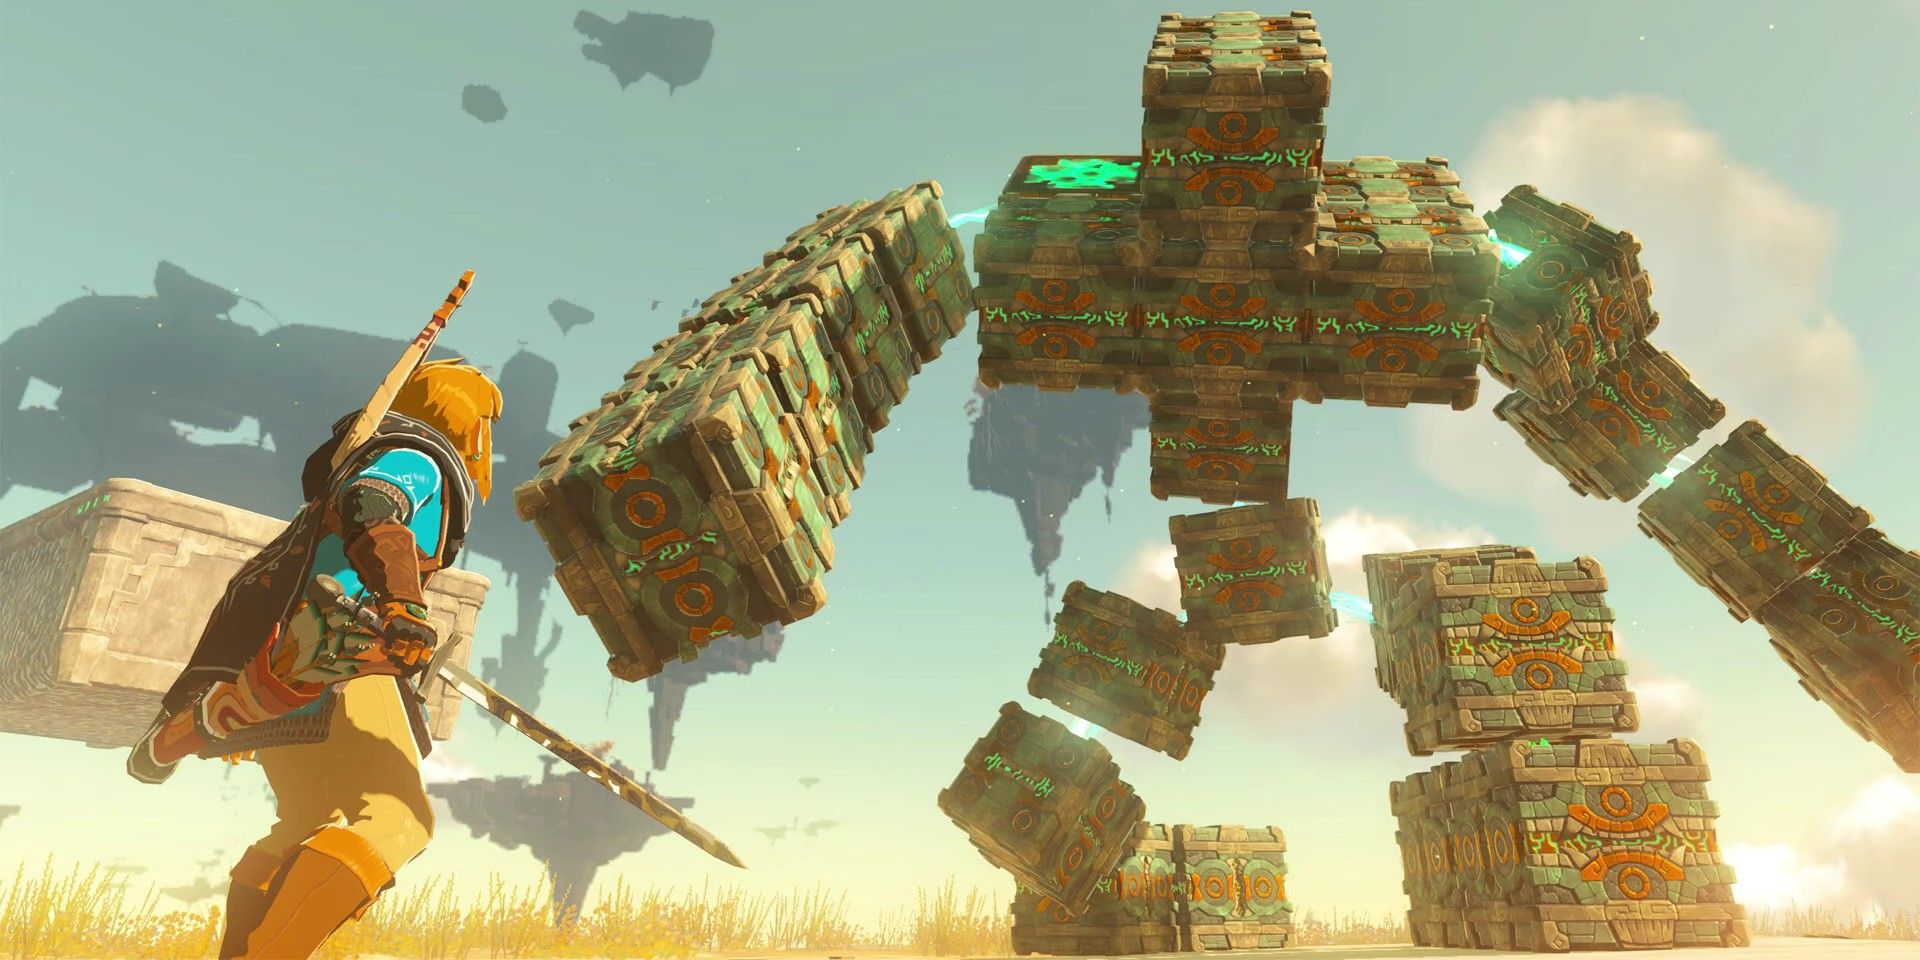 Tears of the Kingdom screenshot of Link on top of a sky island, fighting a large stone golem-like creature make of various blocks